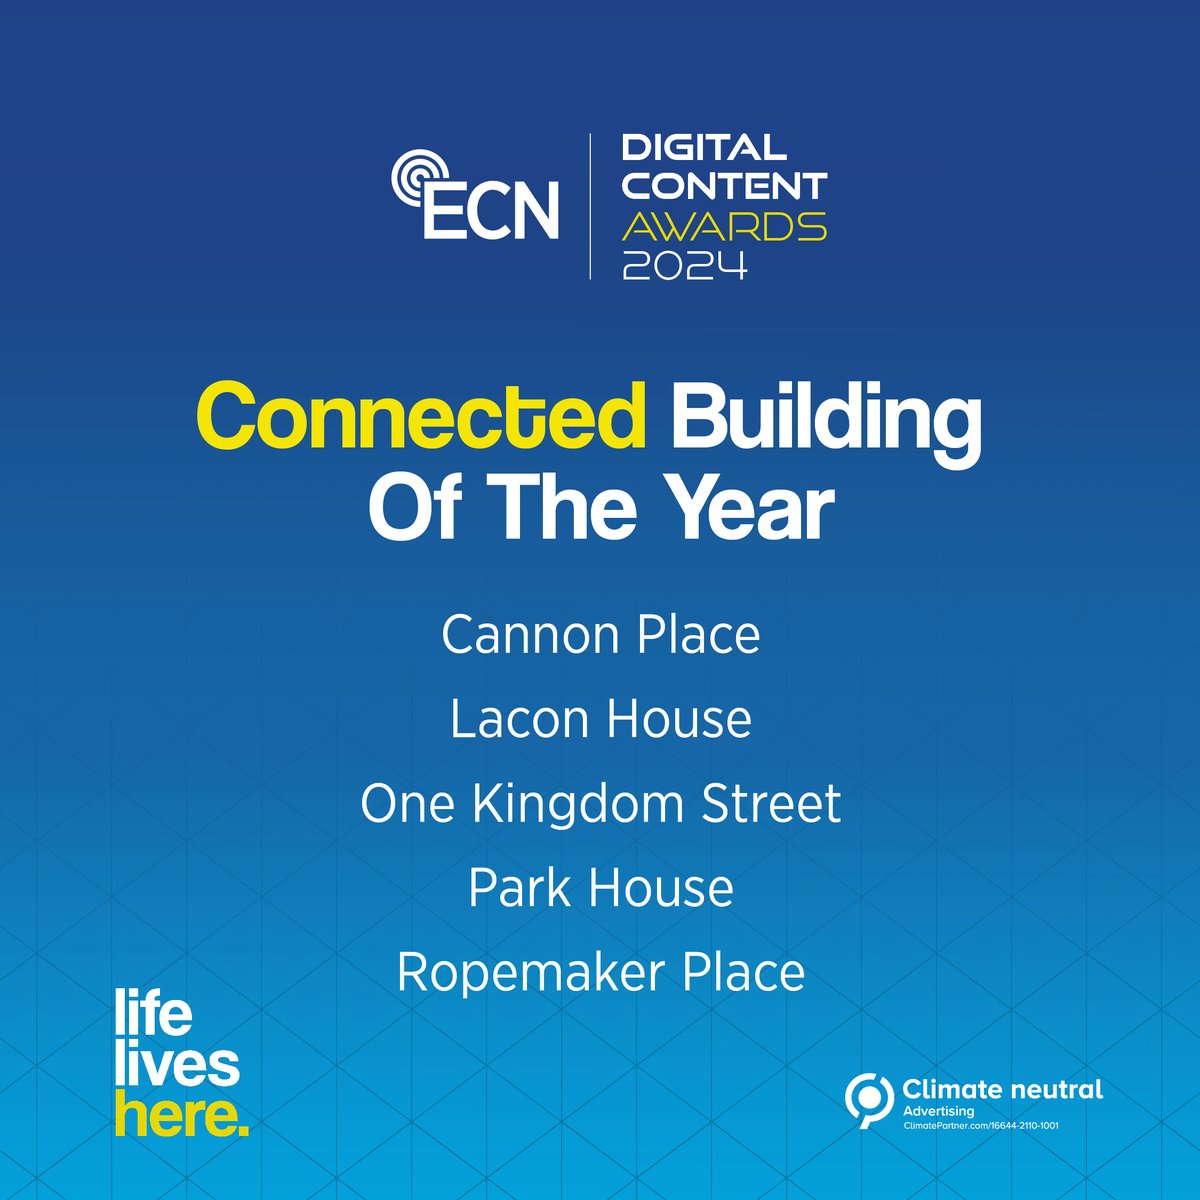 UK: The ECN #digitalcontent #awards 2024 are coming 🎉 On 21st May, we will convene with our #buildingmanager partners to celebrate outstanding #digitalsignage content on our network. Swipe to see the nominees for each award. #internalcommunication #event